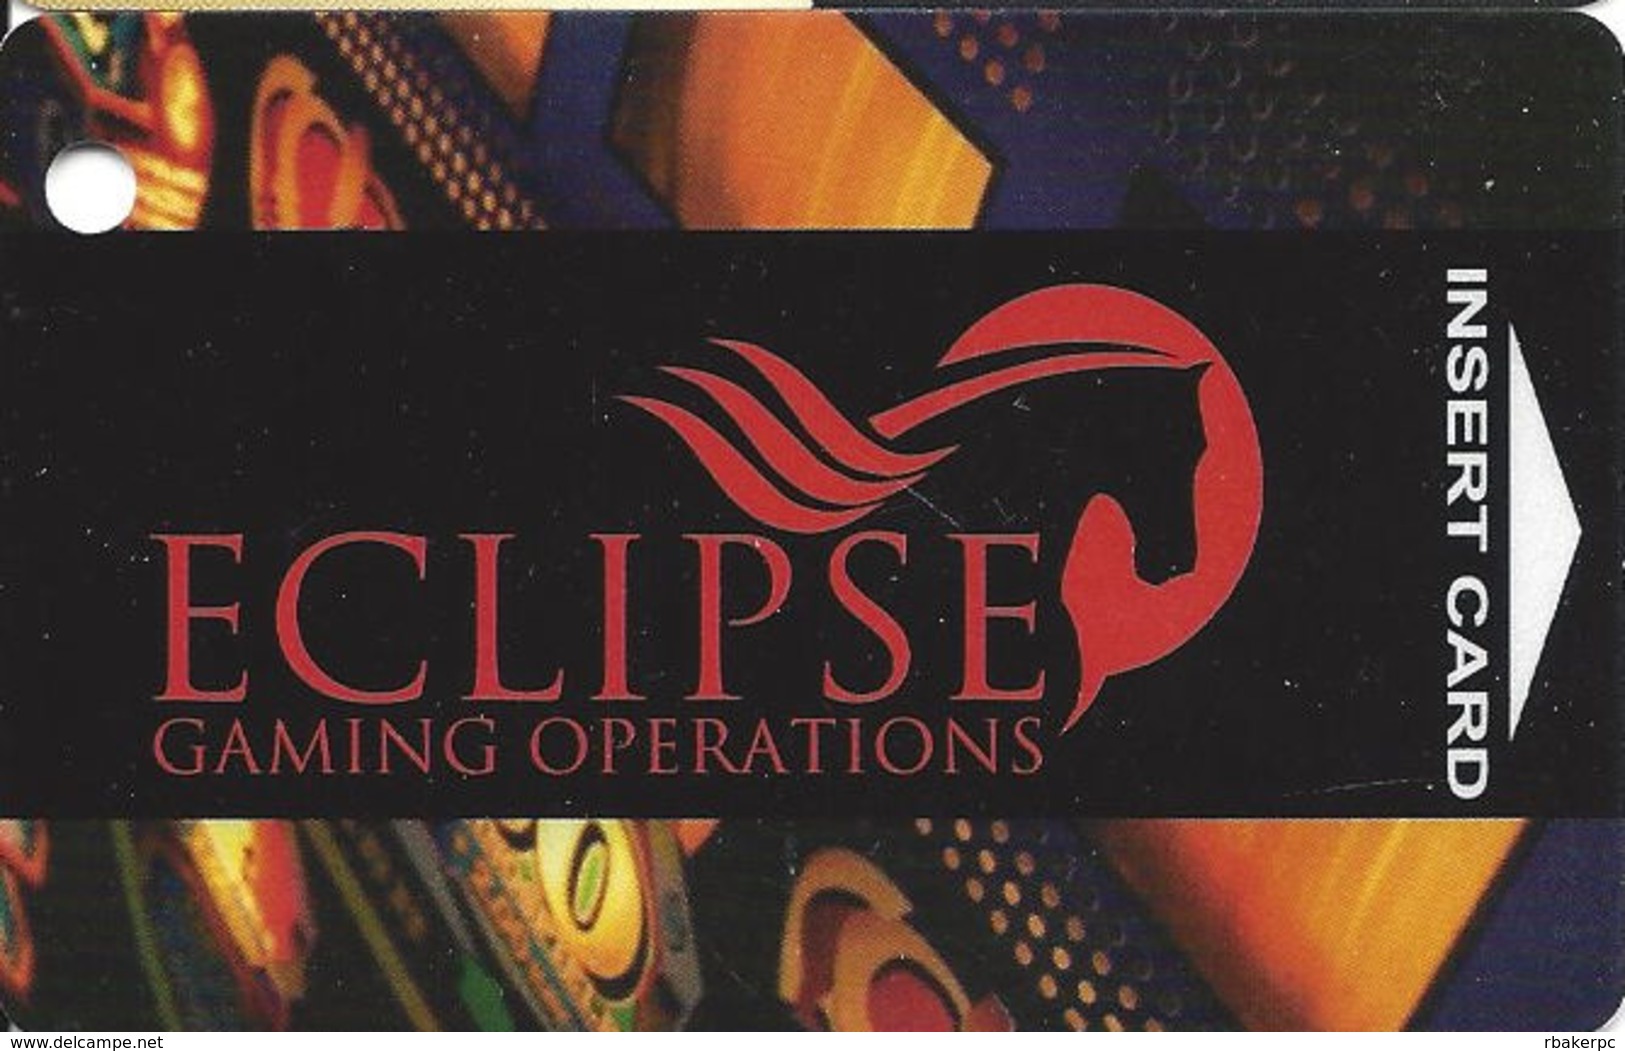 Eclipse Gaming Operations Slot Card Used At Bentley's And Some Jackpot Joanie's Locations In Las Vegas NV - Casino Cards